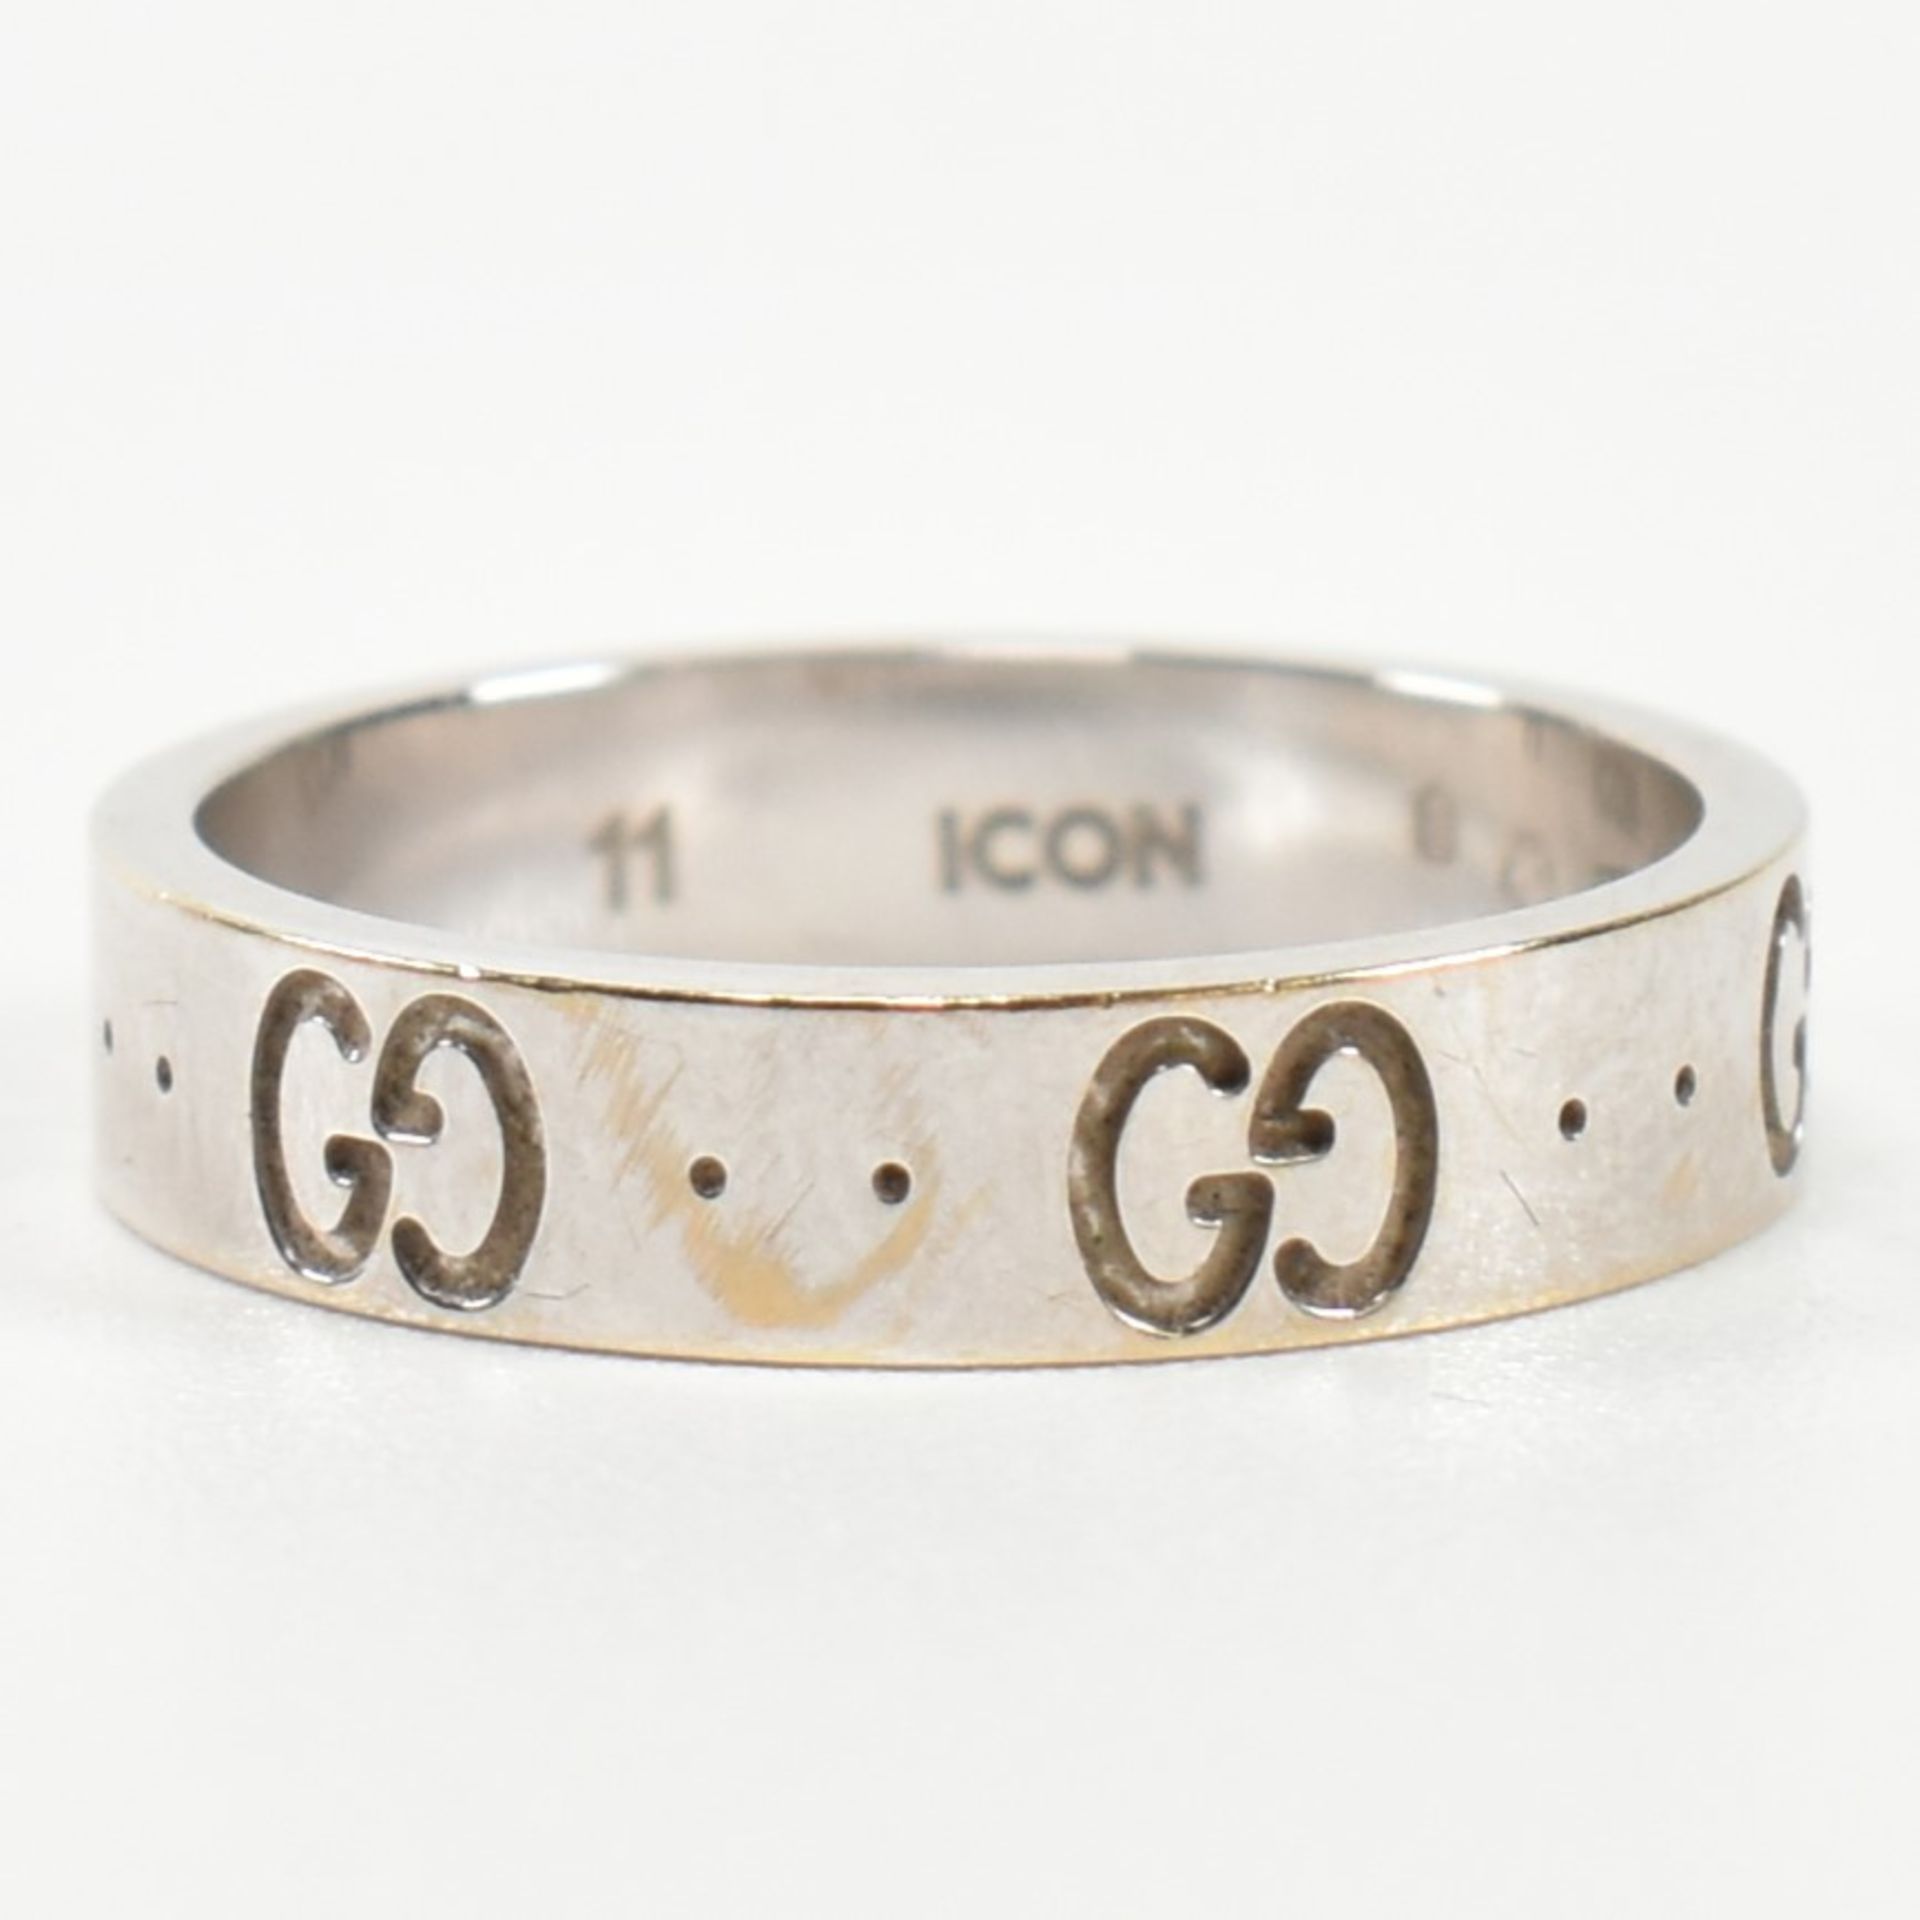 HALLMARKED 18CT WHITE GOLD GUCCI ICON BAND RING - Image 4 of 8